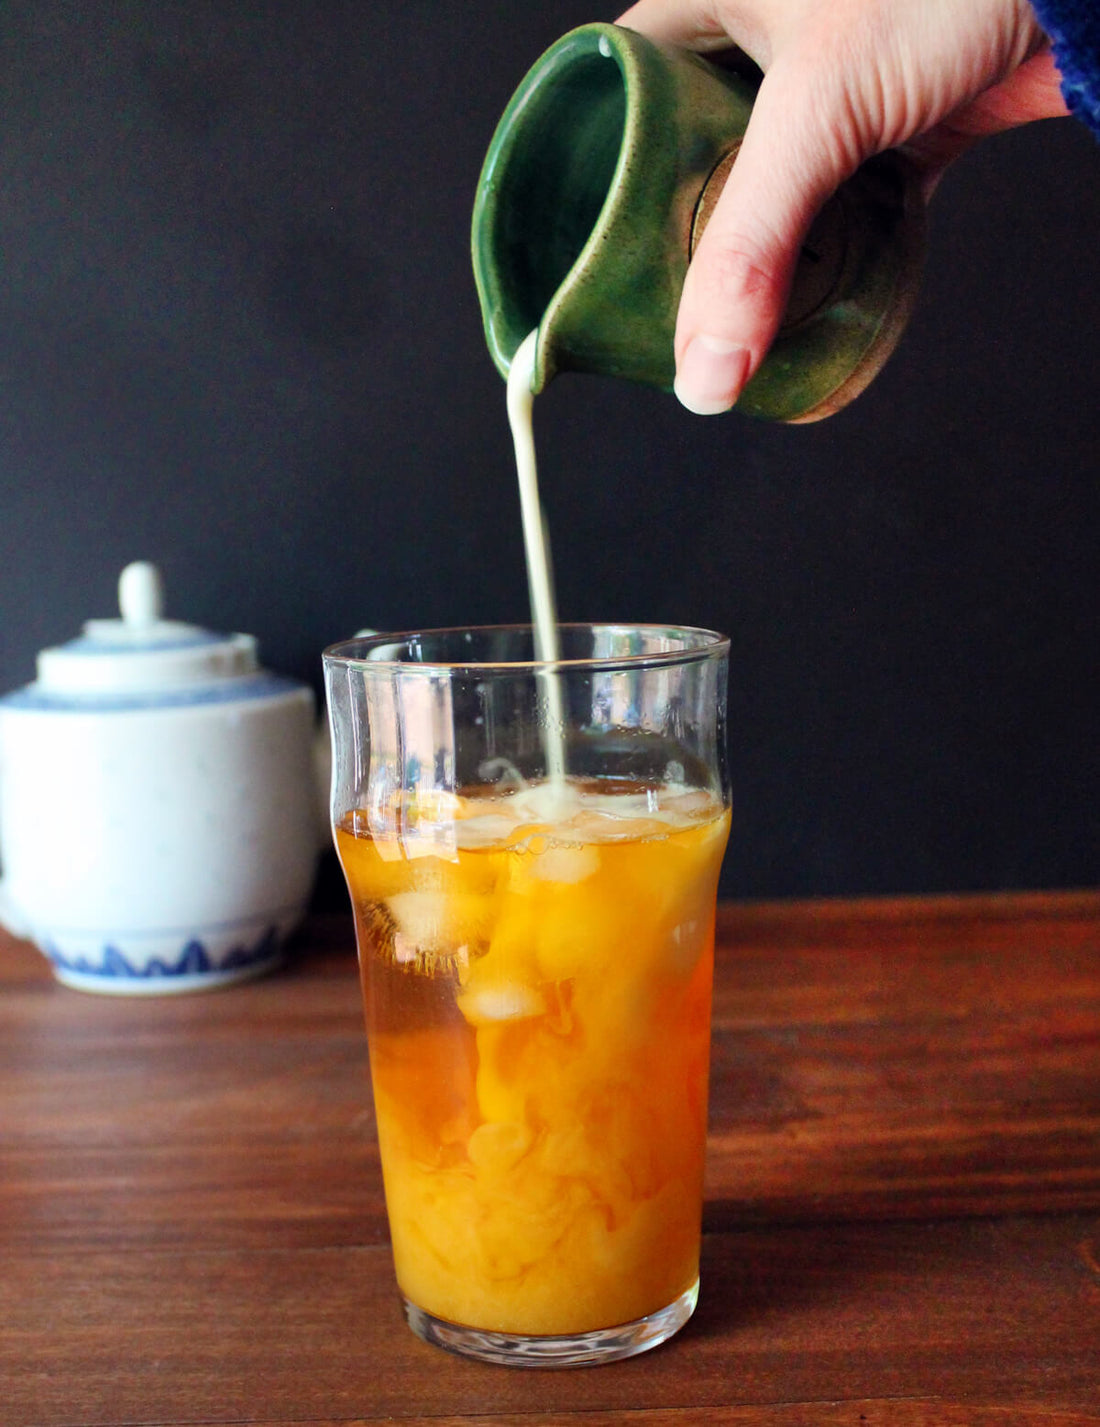 How To Make Thai Tea from Scratch